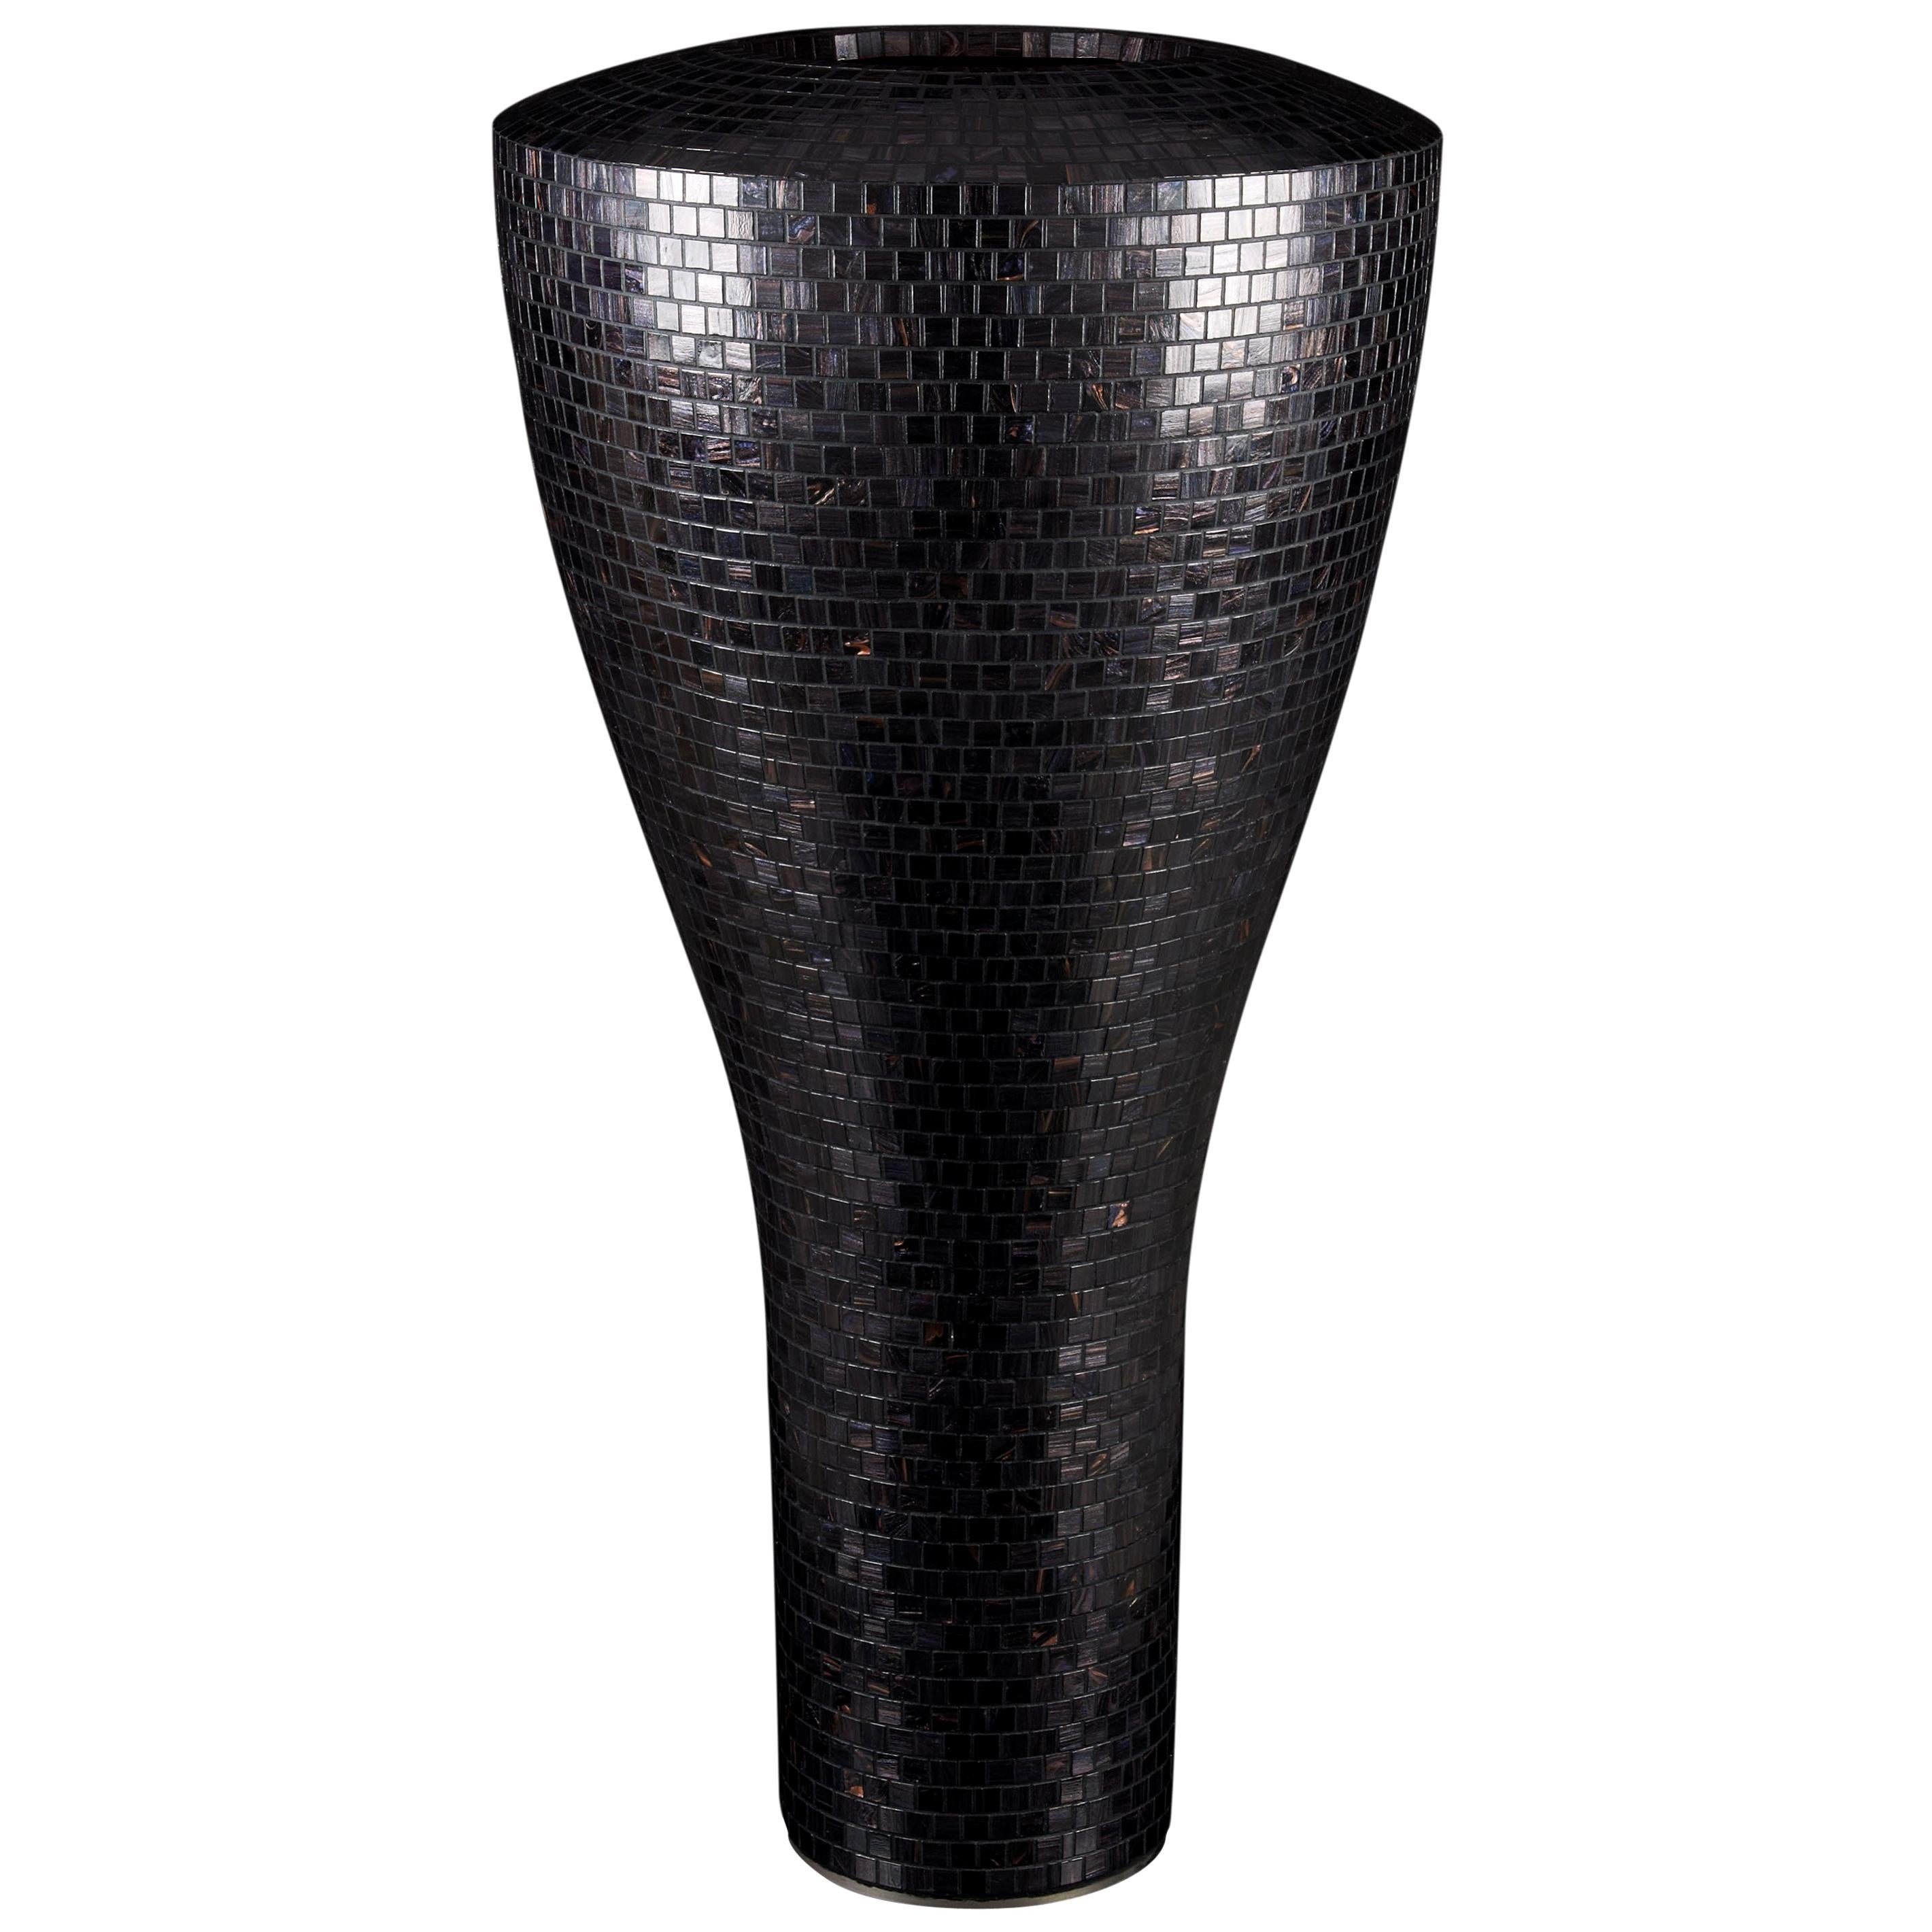 Tippy Vase, LDPE, Indoor, Bisazza Mosaic, Italy For Sale